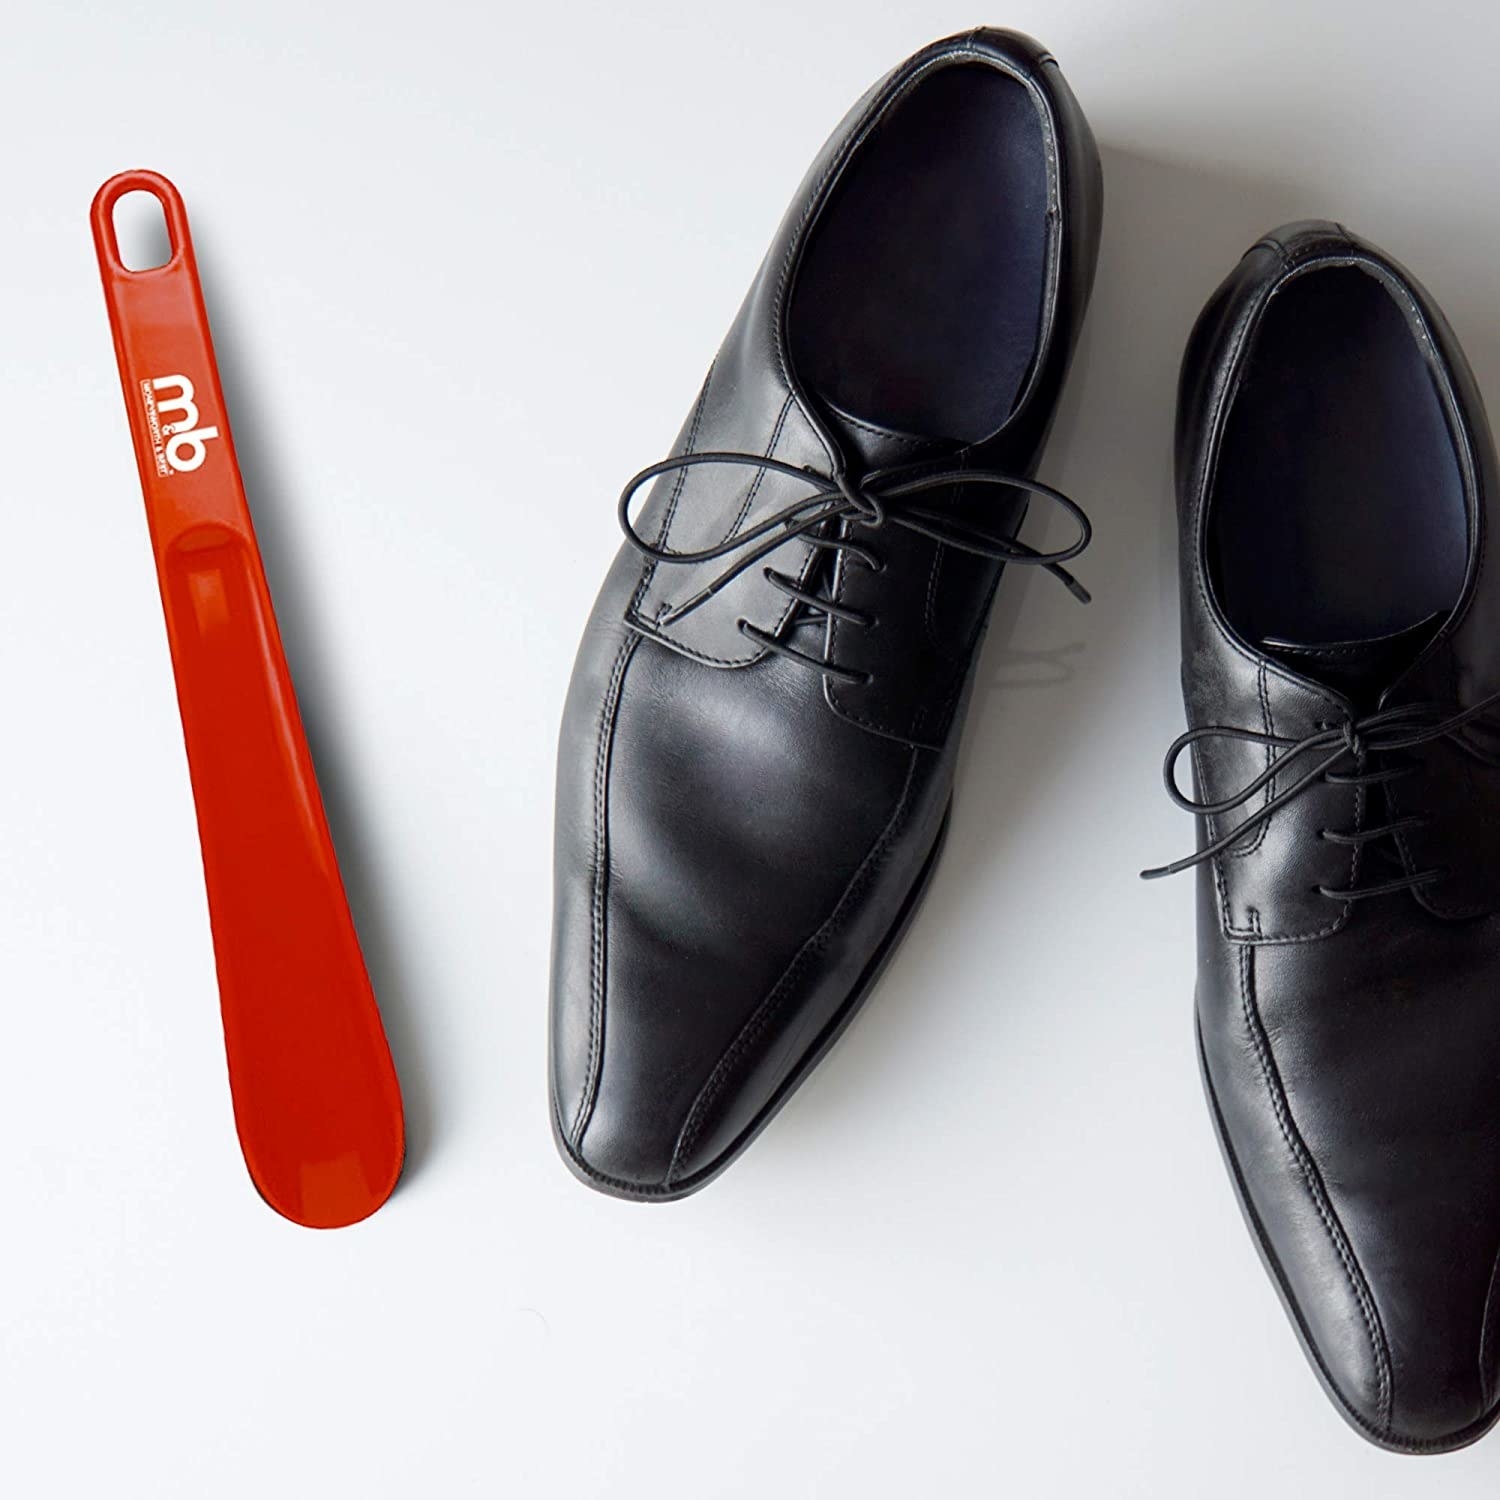 A shoe horn beside a pair of oxfords